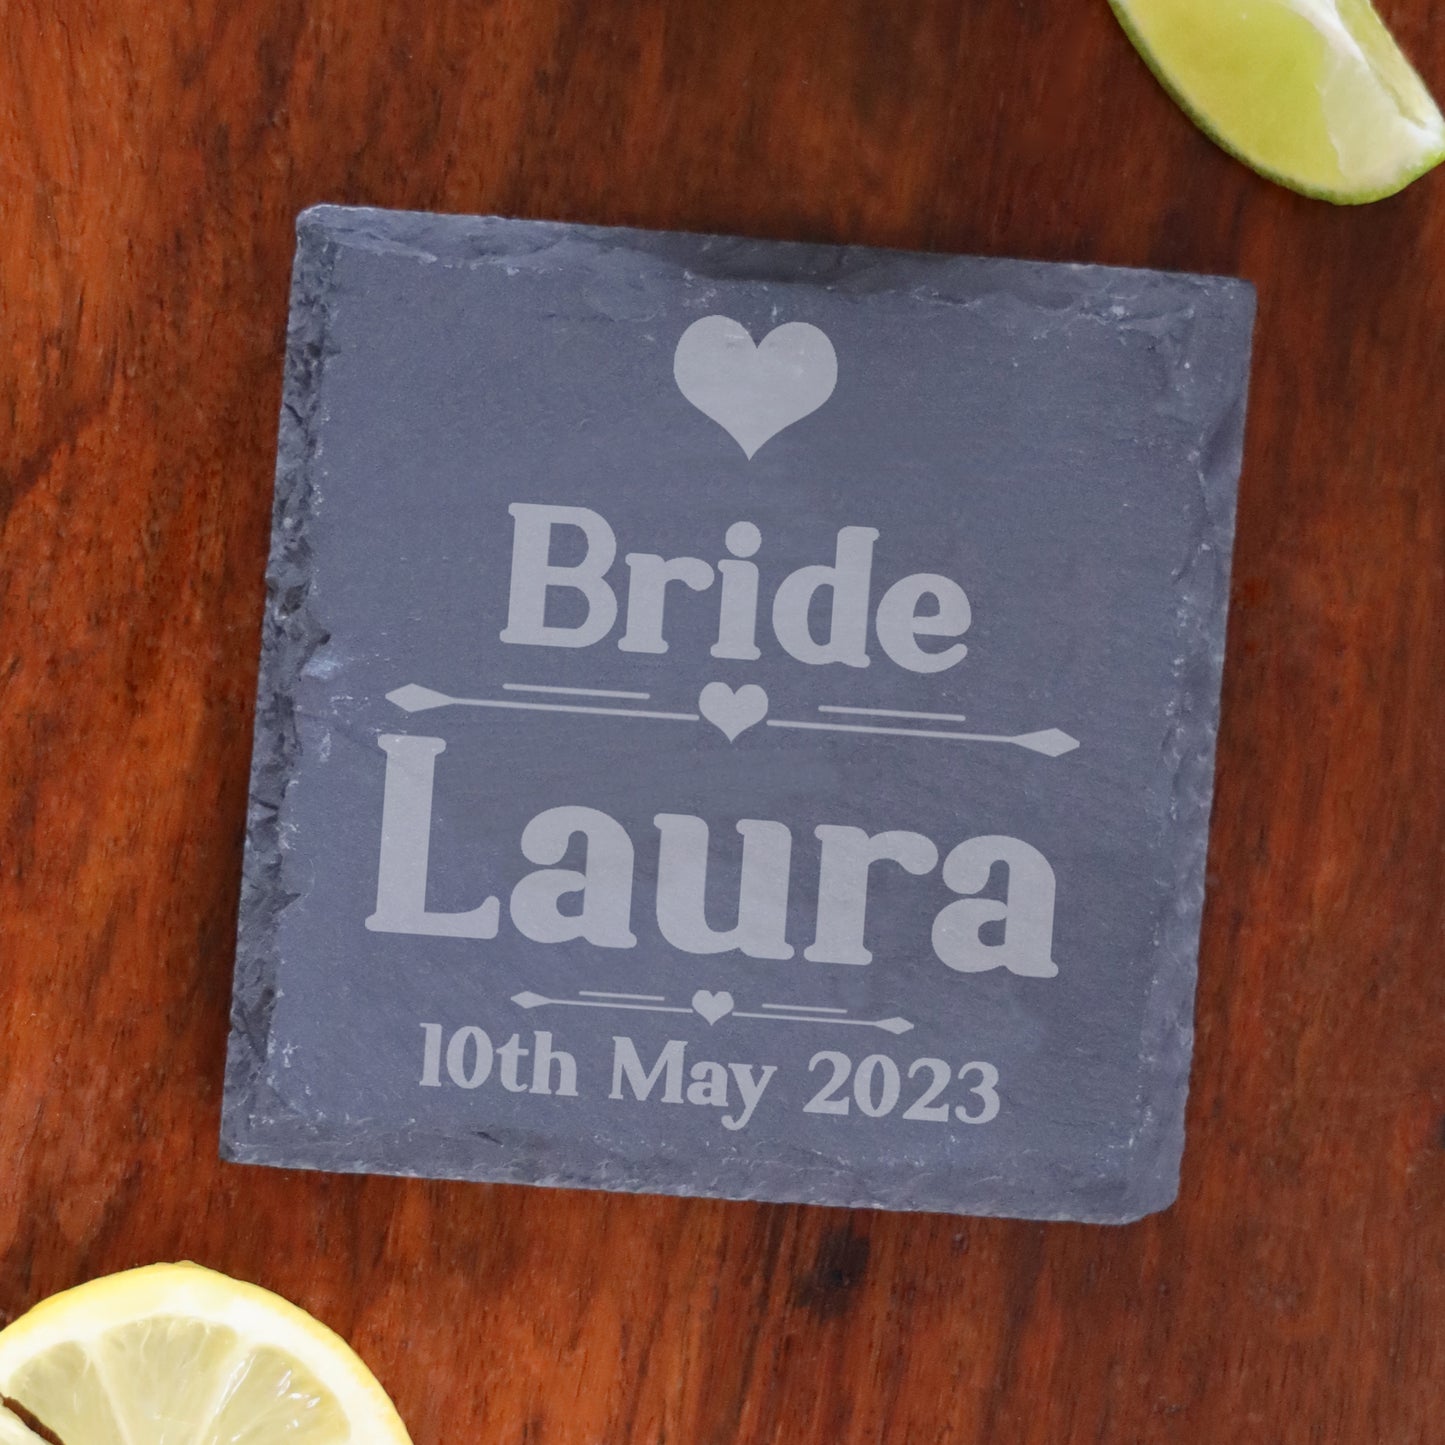 Personalised Bride & Groom Engraved Glass and/or Coaster Wedding Gift Set  - Always Looking Good - 2 x Square Coaster's On Their Own  